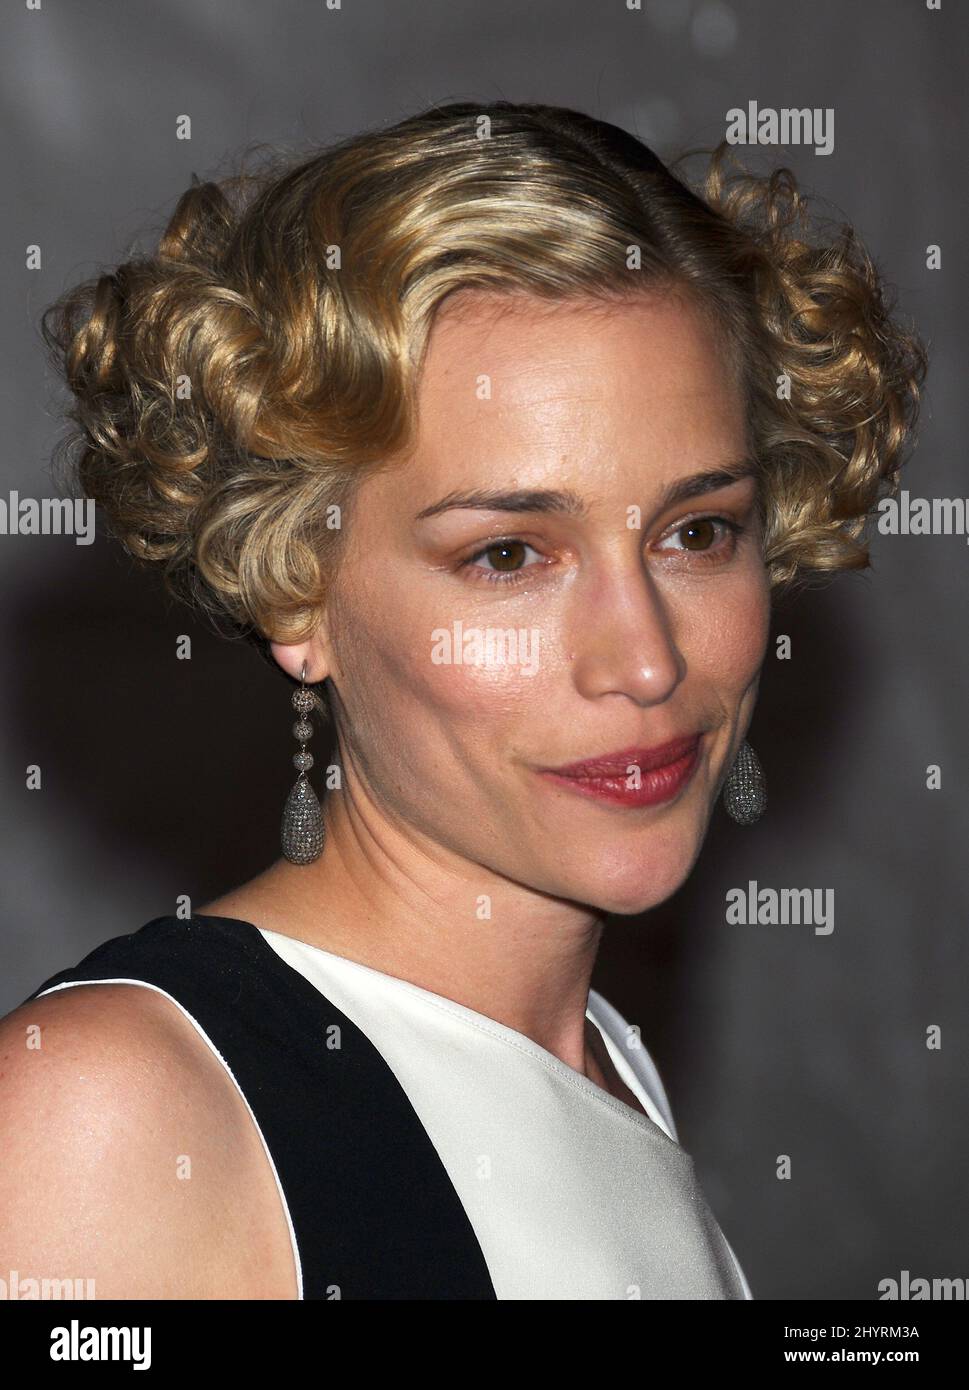 Piper Perabo arriving at the Costume Institute Gala held at the Metropolitan Museum in New York City. Stock Photo